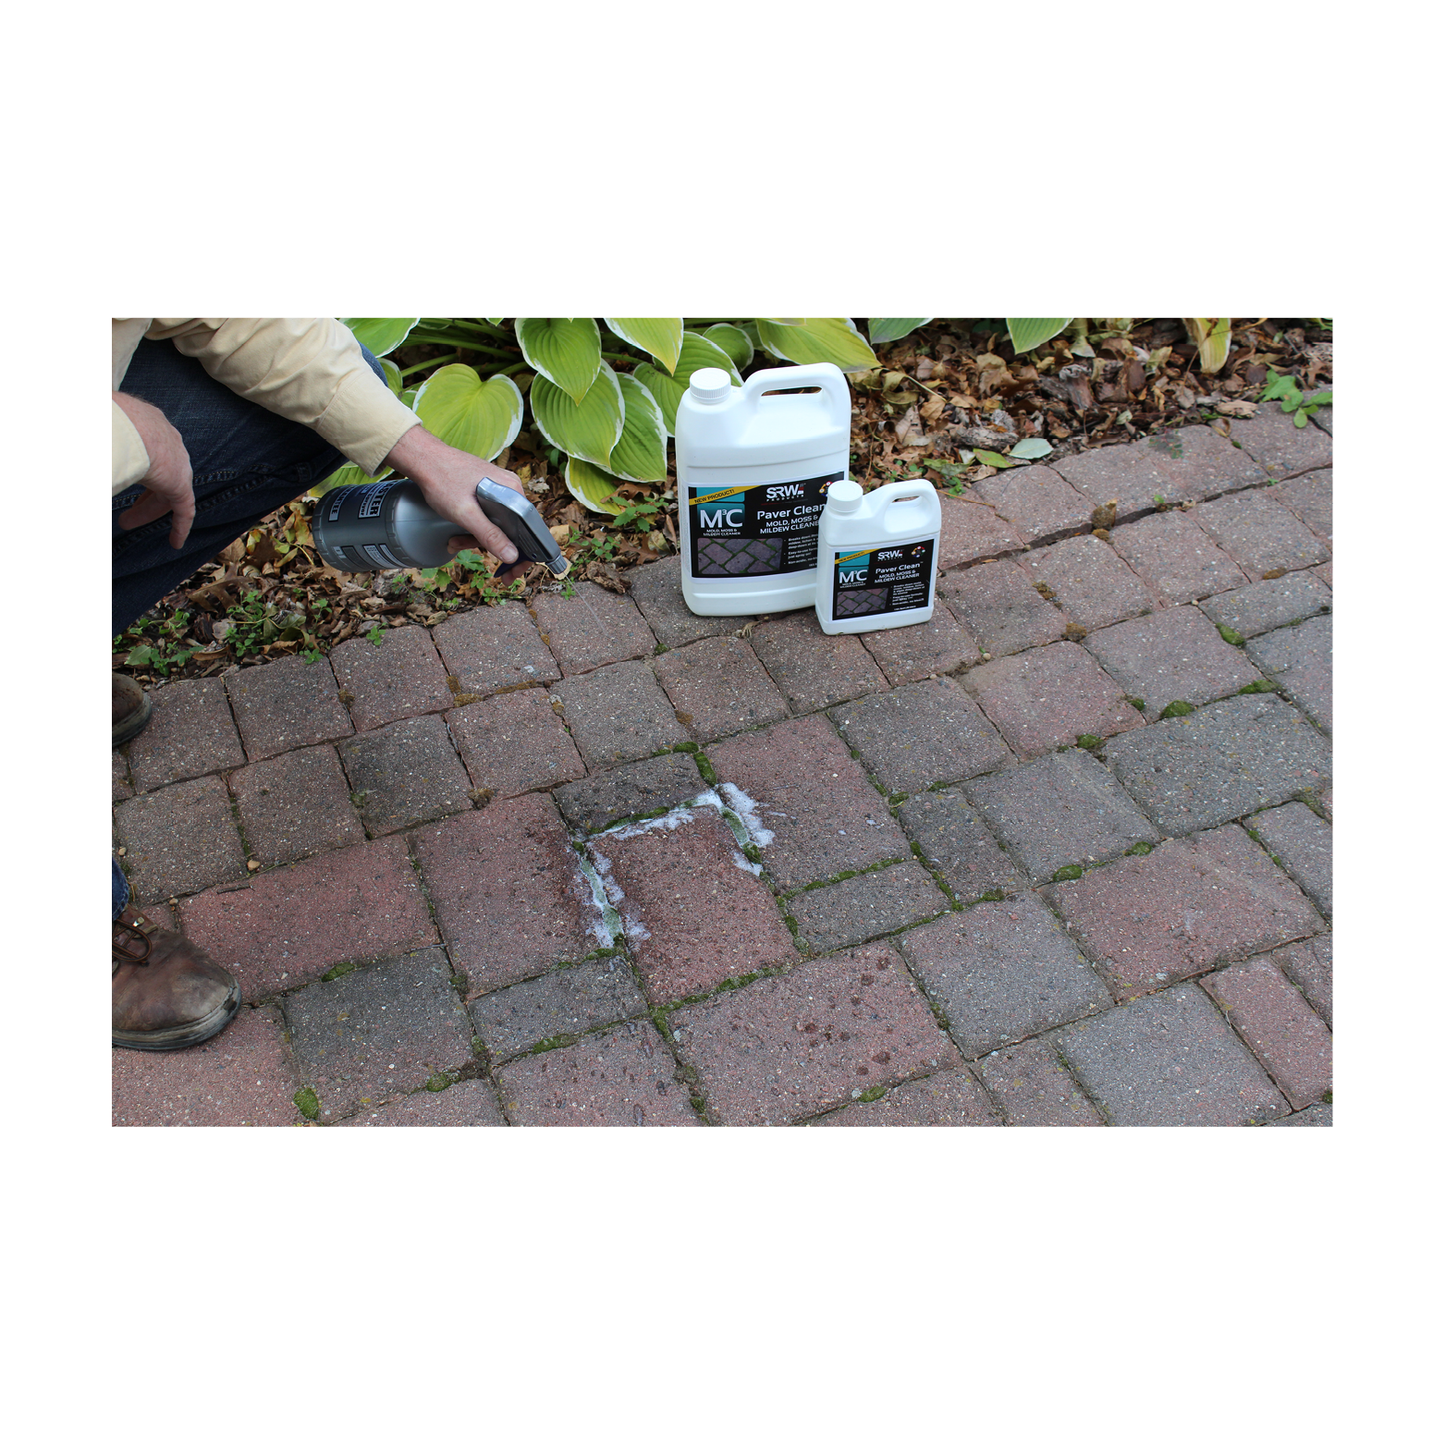 Spraying m3c cleaner onto paver patio to remove moss